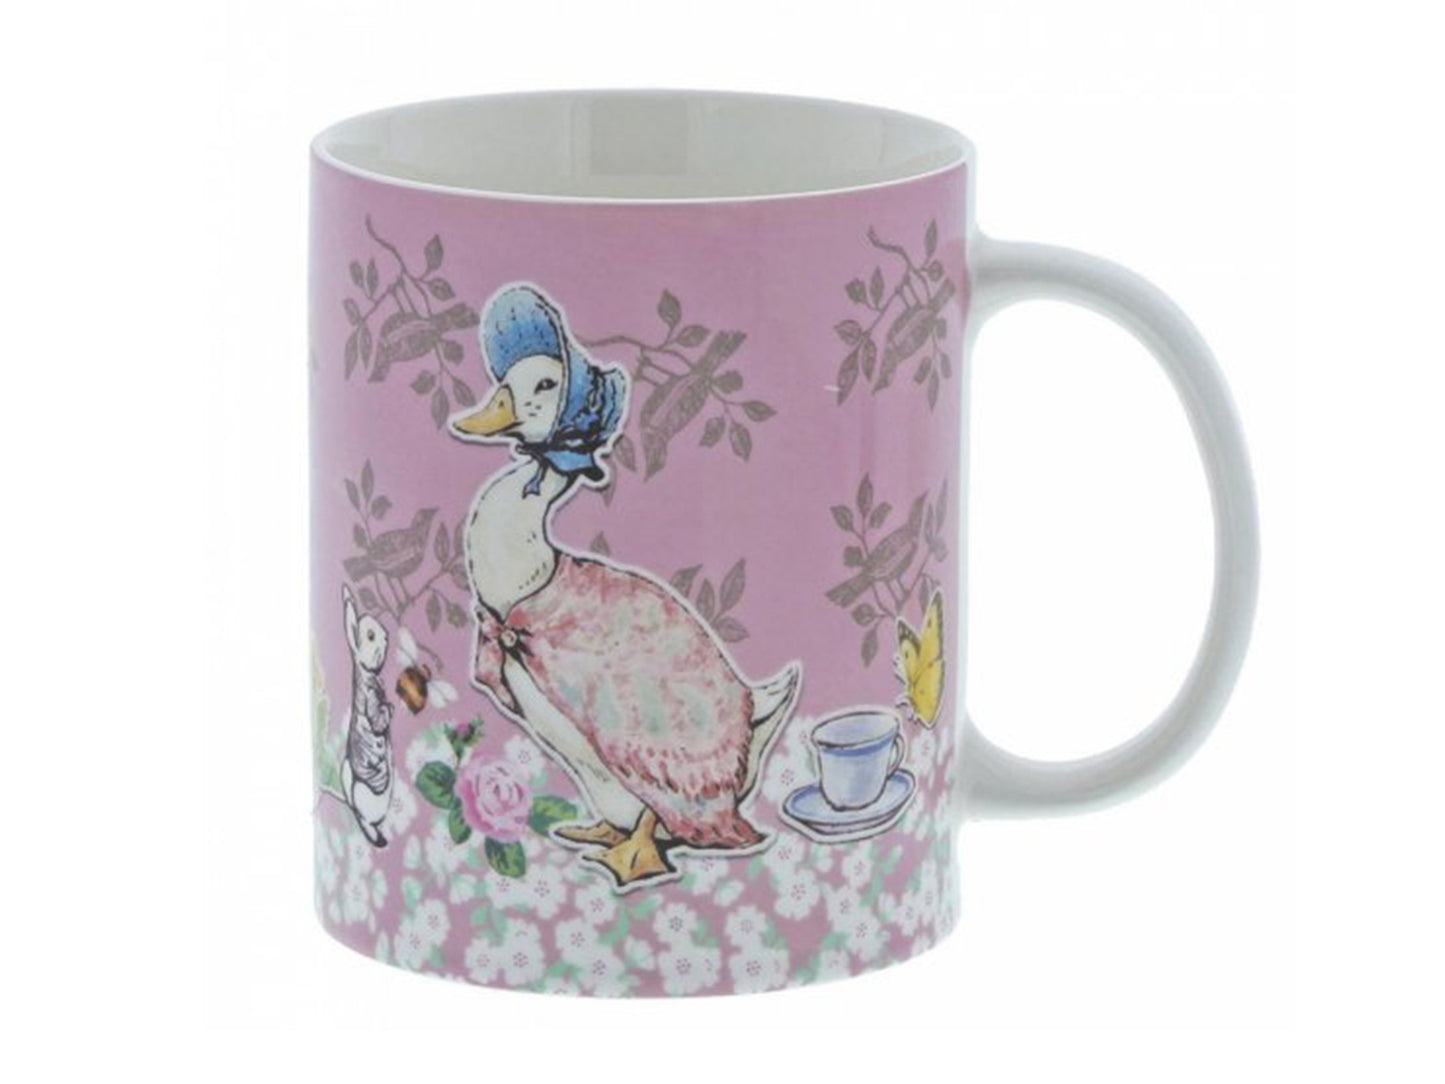 A white ceramic mug with a pink floral transfer with a white duck on one side, wearing a pink shawl and blue bonnet.